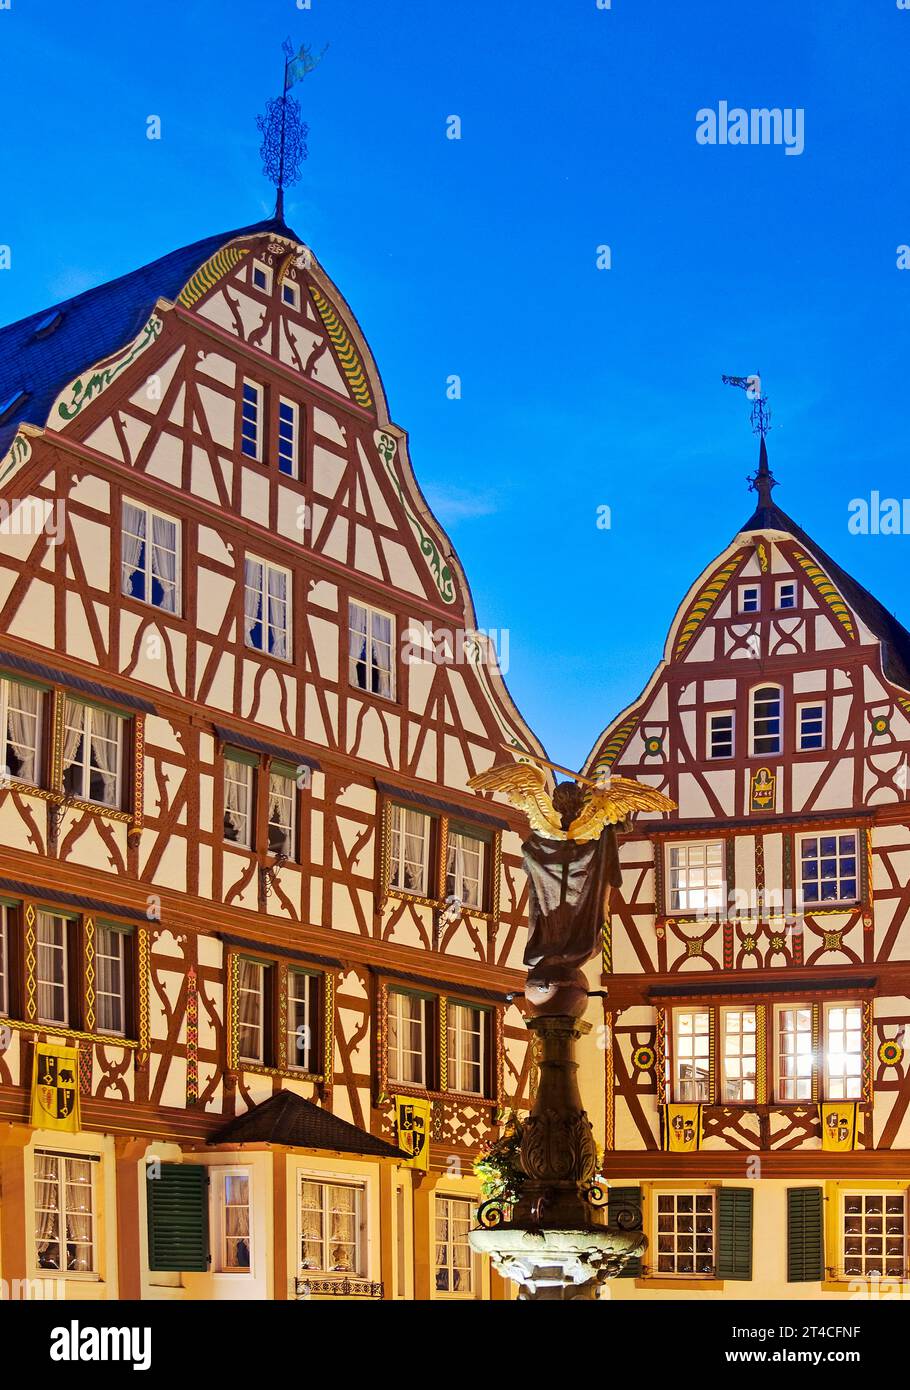 gabled half-timbered houses on the medieval market square in the evening, Germany, Rhineland-Palatinate, Bernkastel-Kues Stock Photo